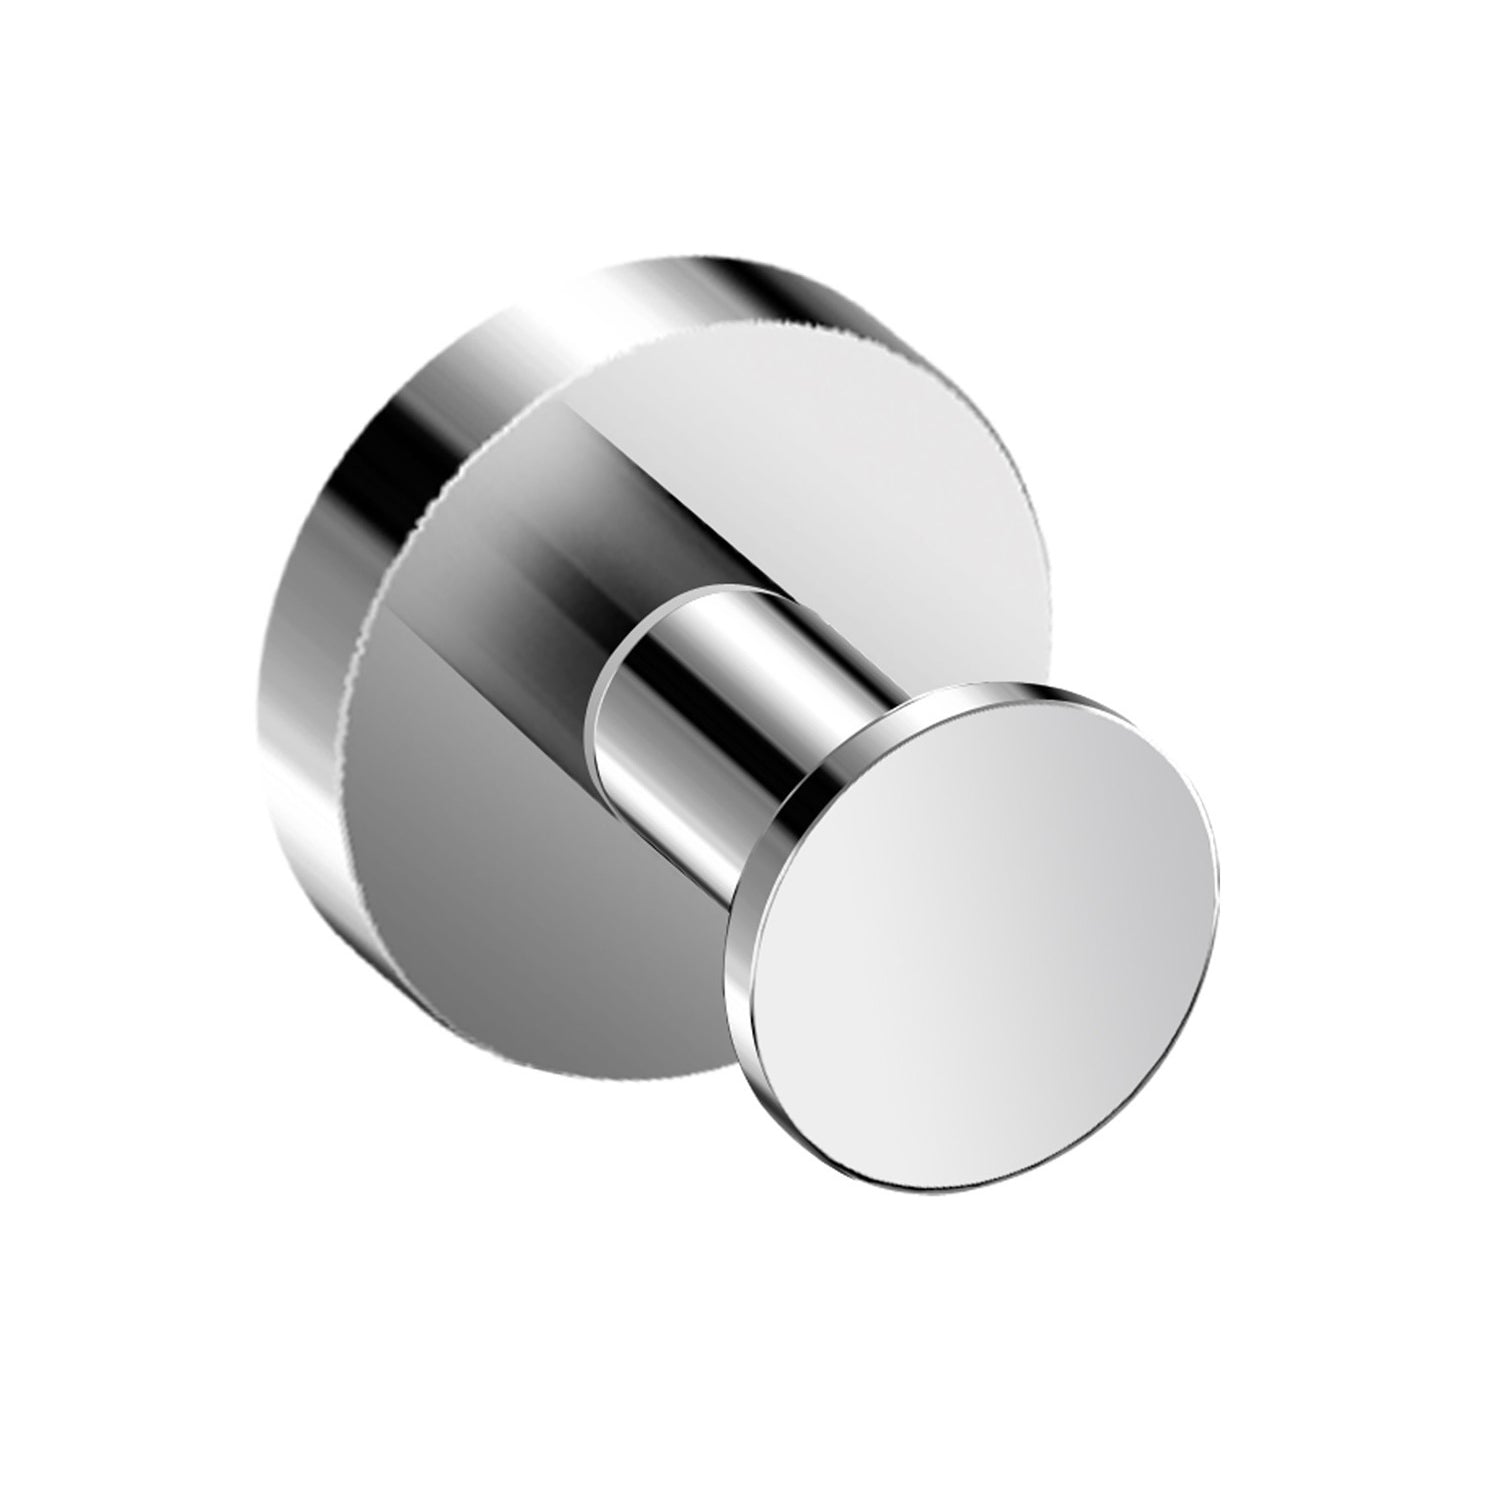 DAX Valencia Towel Hook, Wall Mount Stainless Steel, Chrome Finish, 2 x 1-11/16 x 2 Inches (DAX-GDC120121)